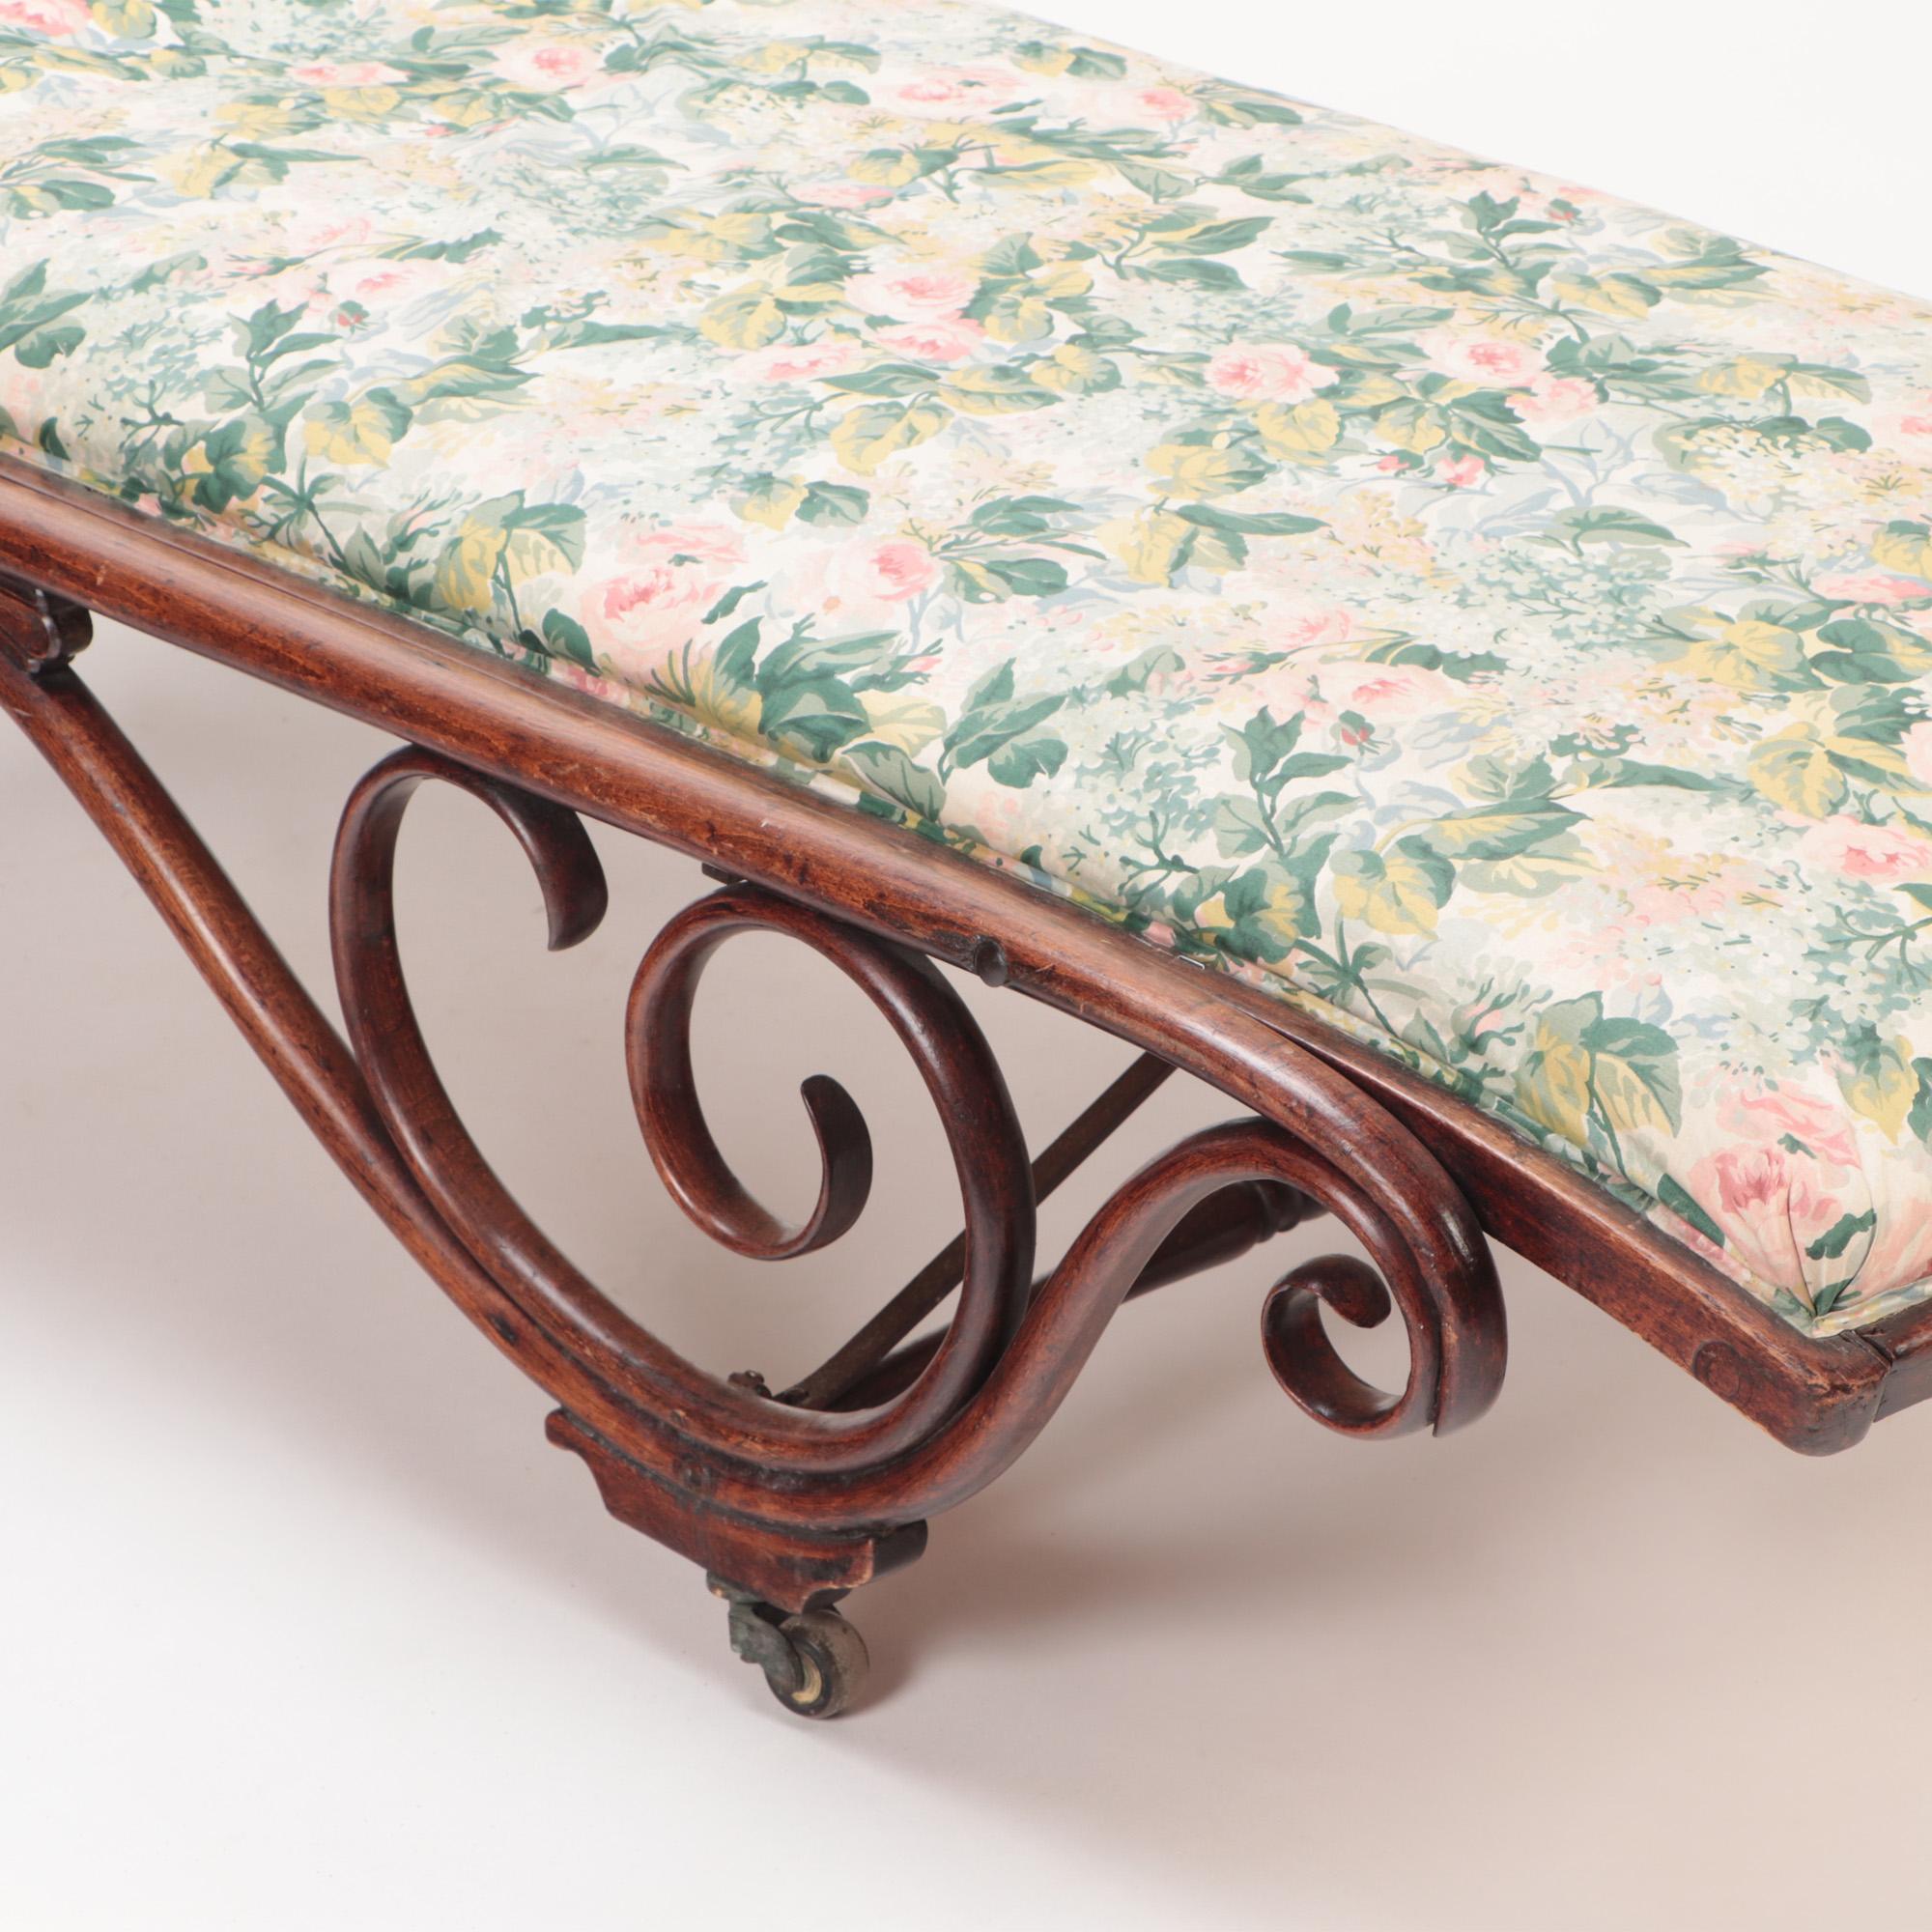 Early 20th Century Bentwood and Upholstered Chaise Lounge by Thonet circa 1900 For Sale